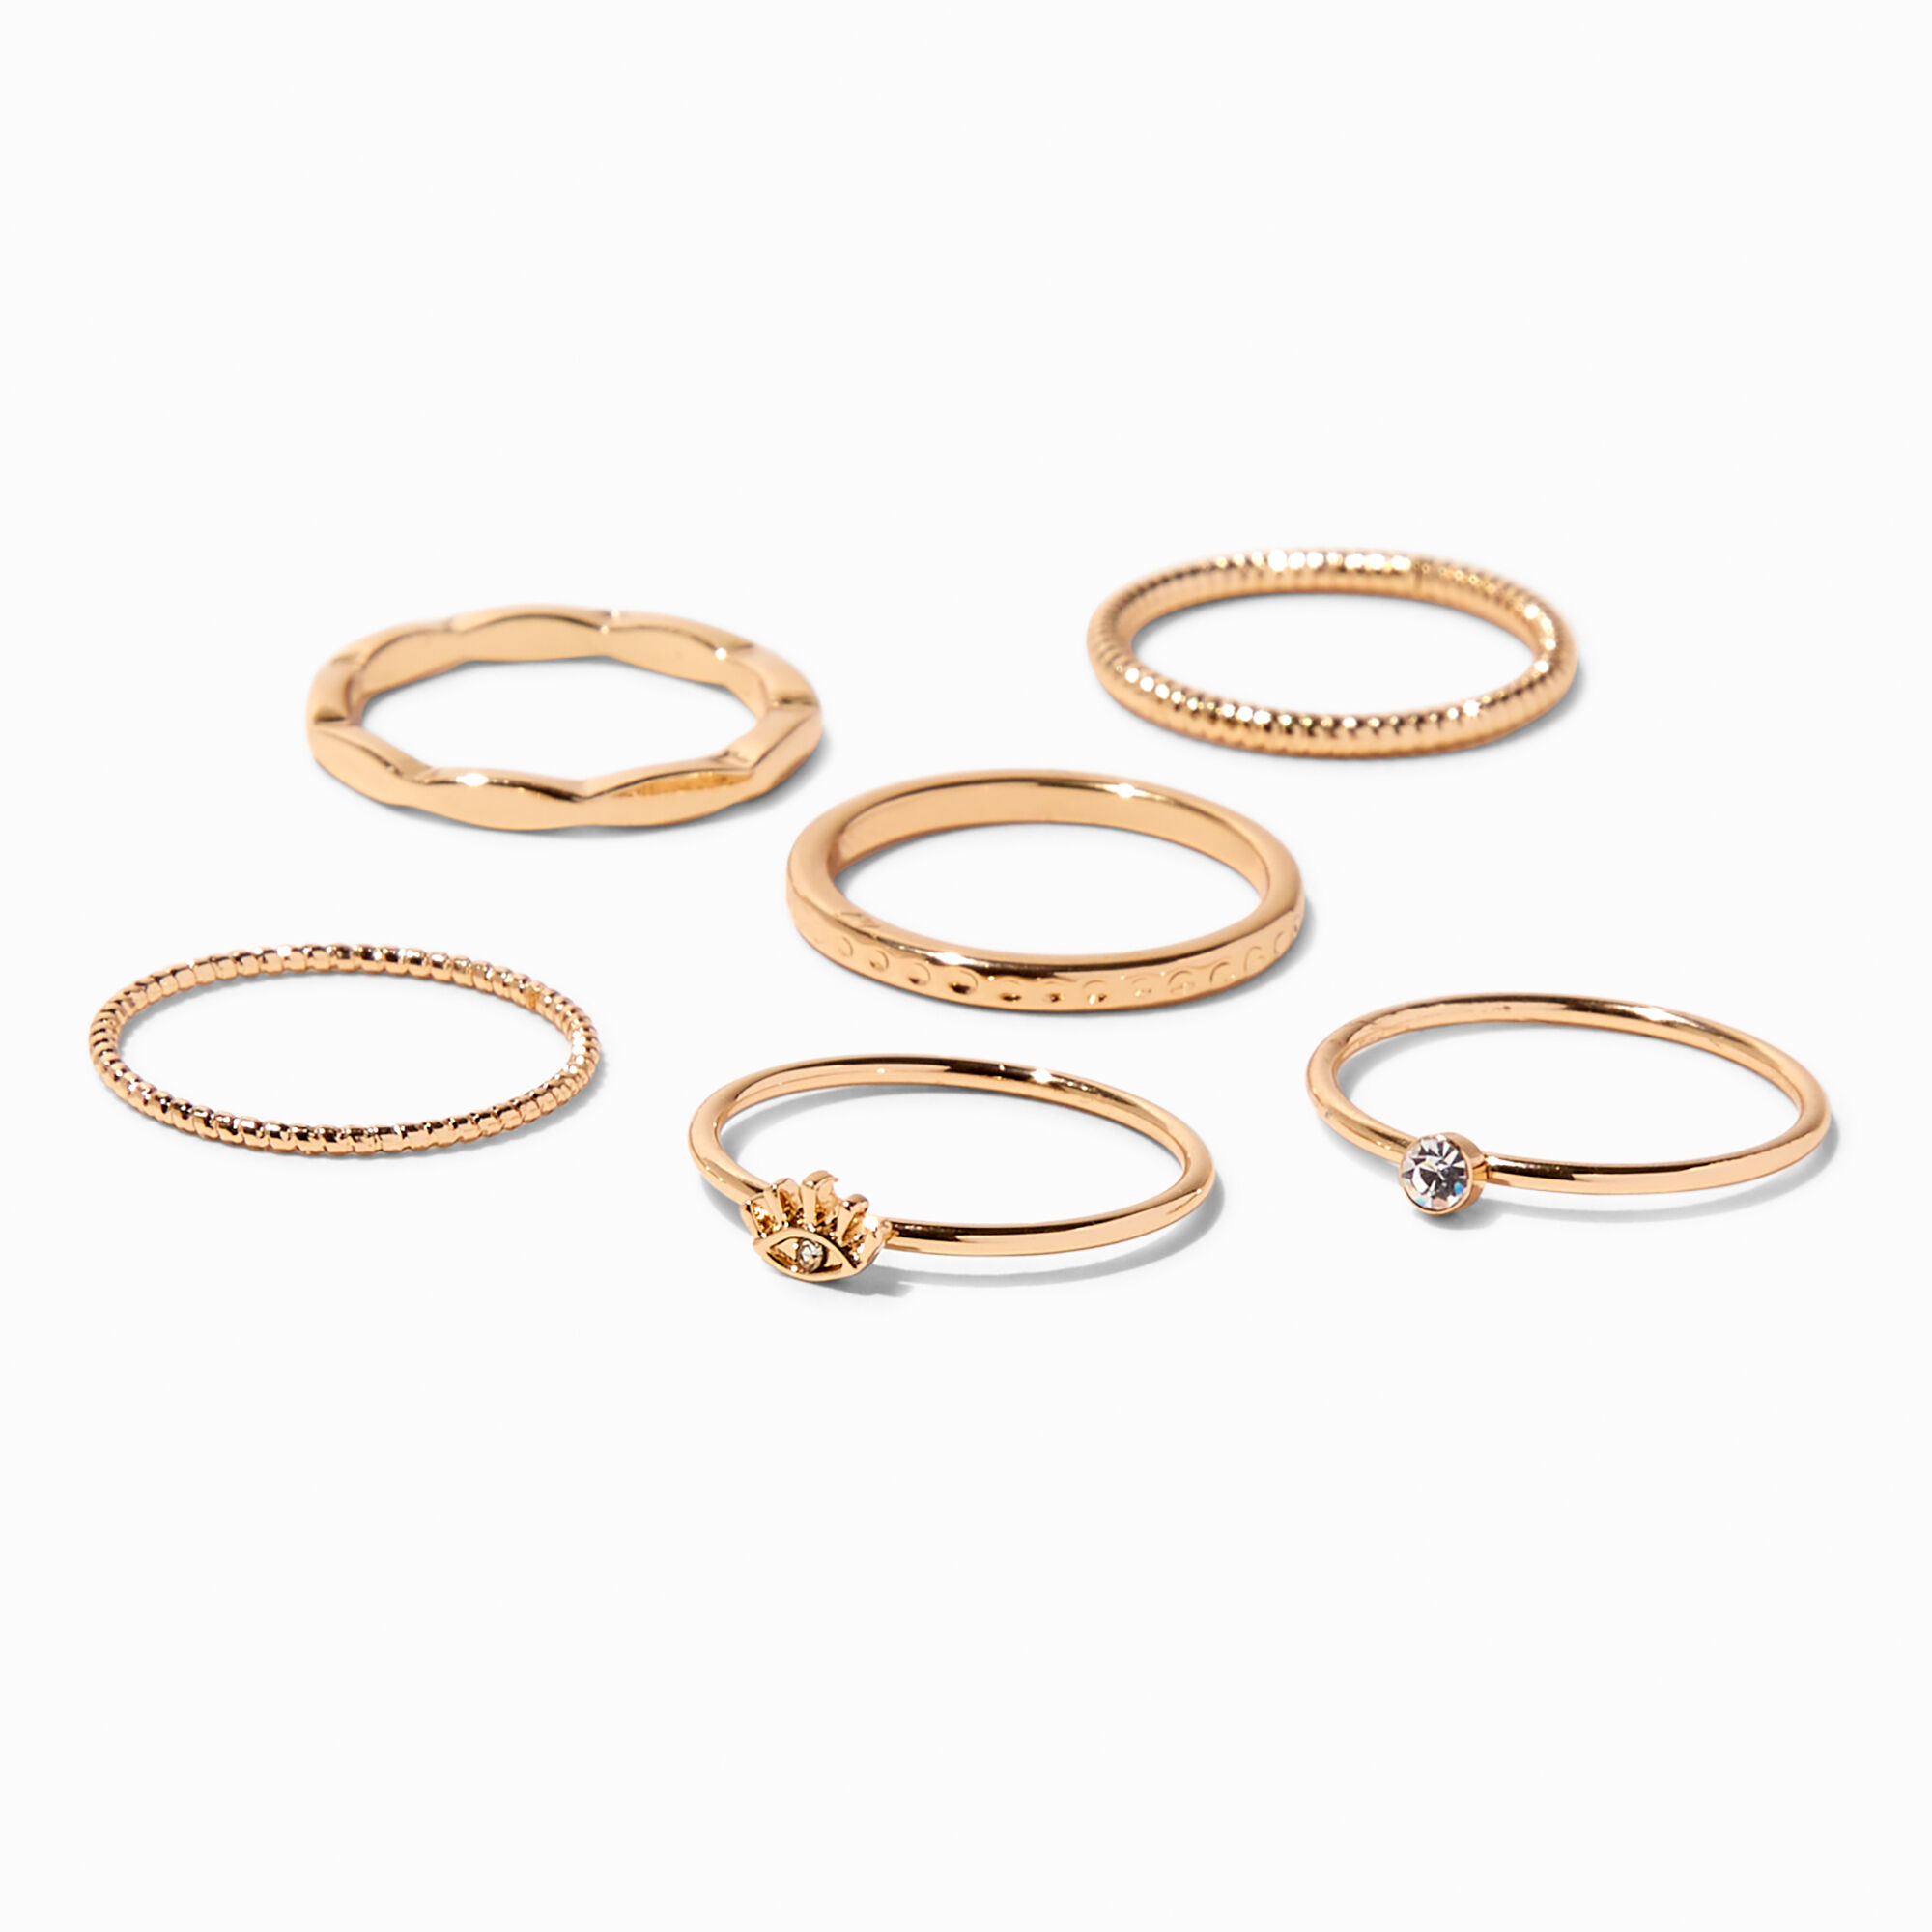 View Claires Geometric Twist Ring Set 6 Pack Gold information